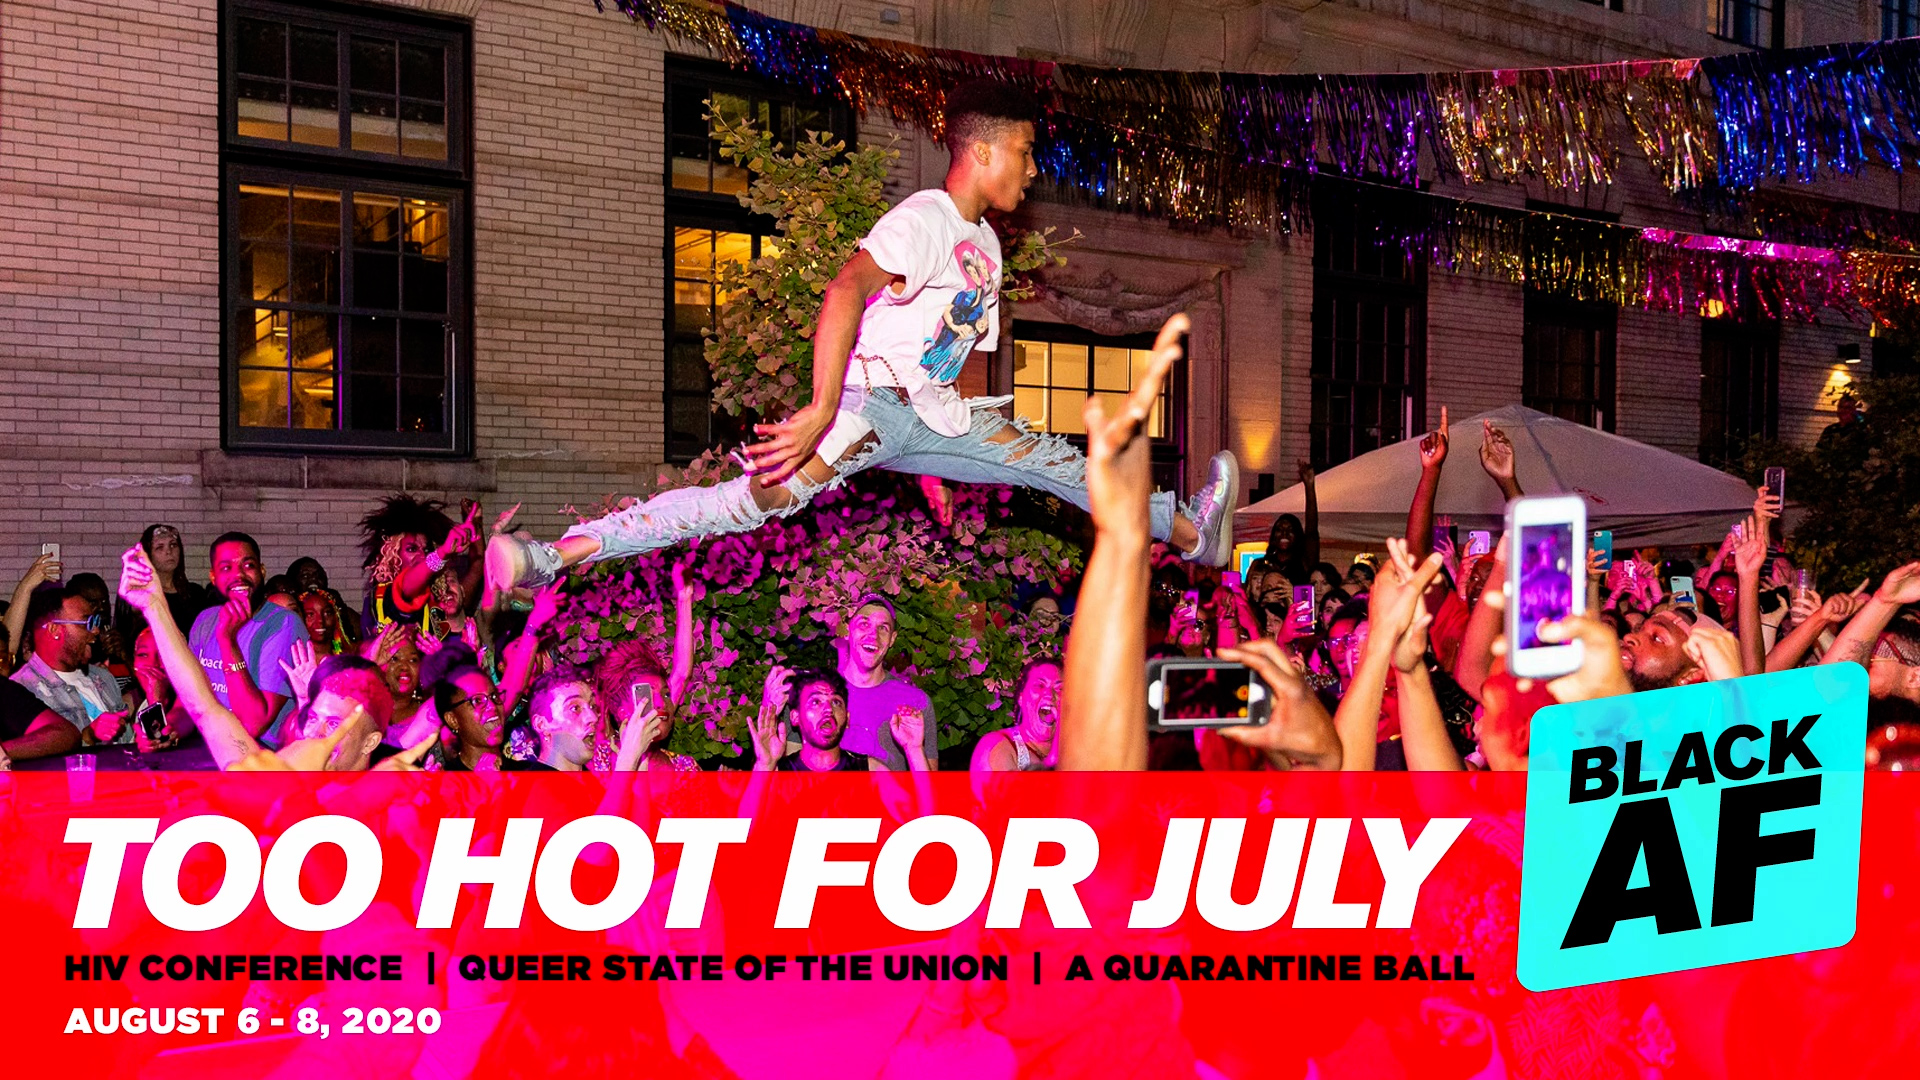 Participants of Too Hot for July in a previous year enjoy festivities and music. A crowd gathers raising phones in the air while a young man leaps over them.